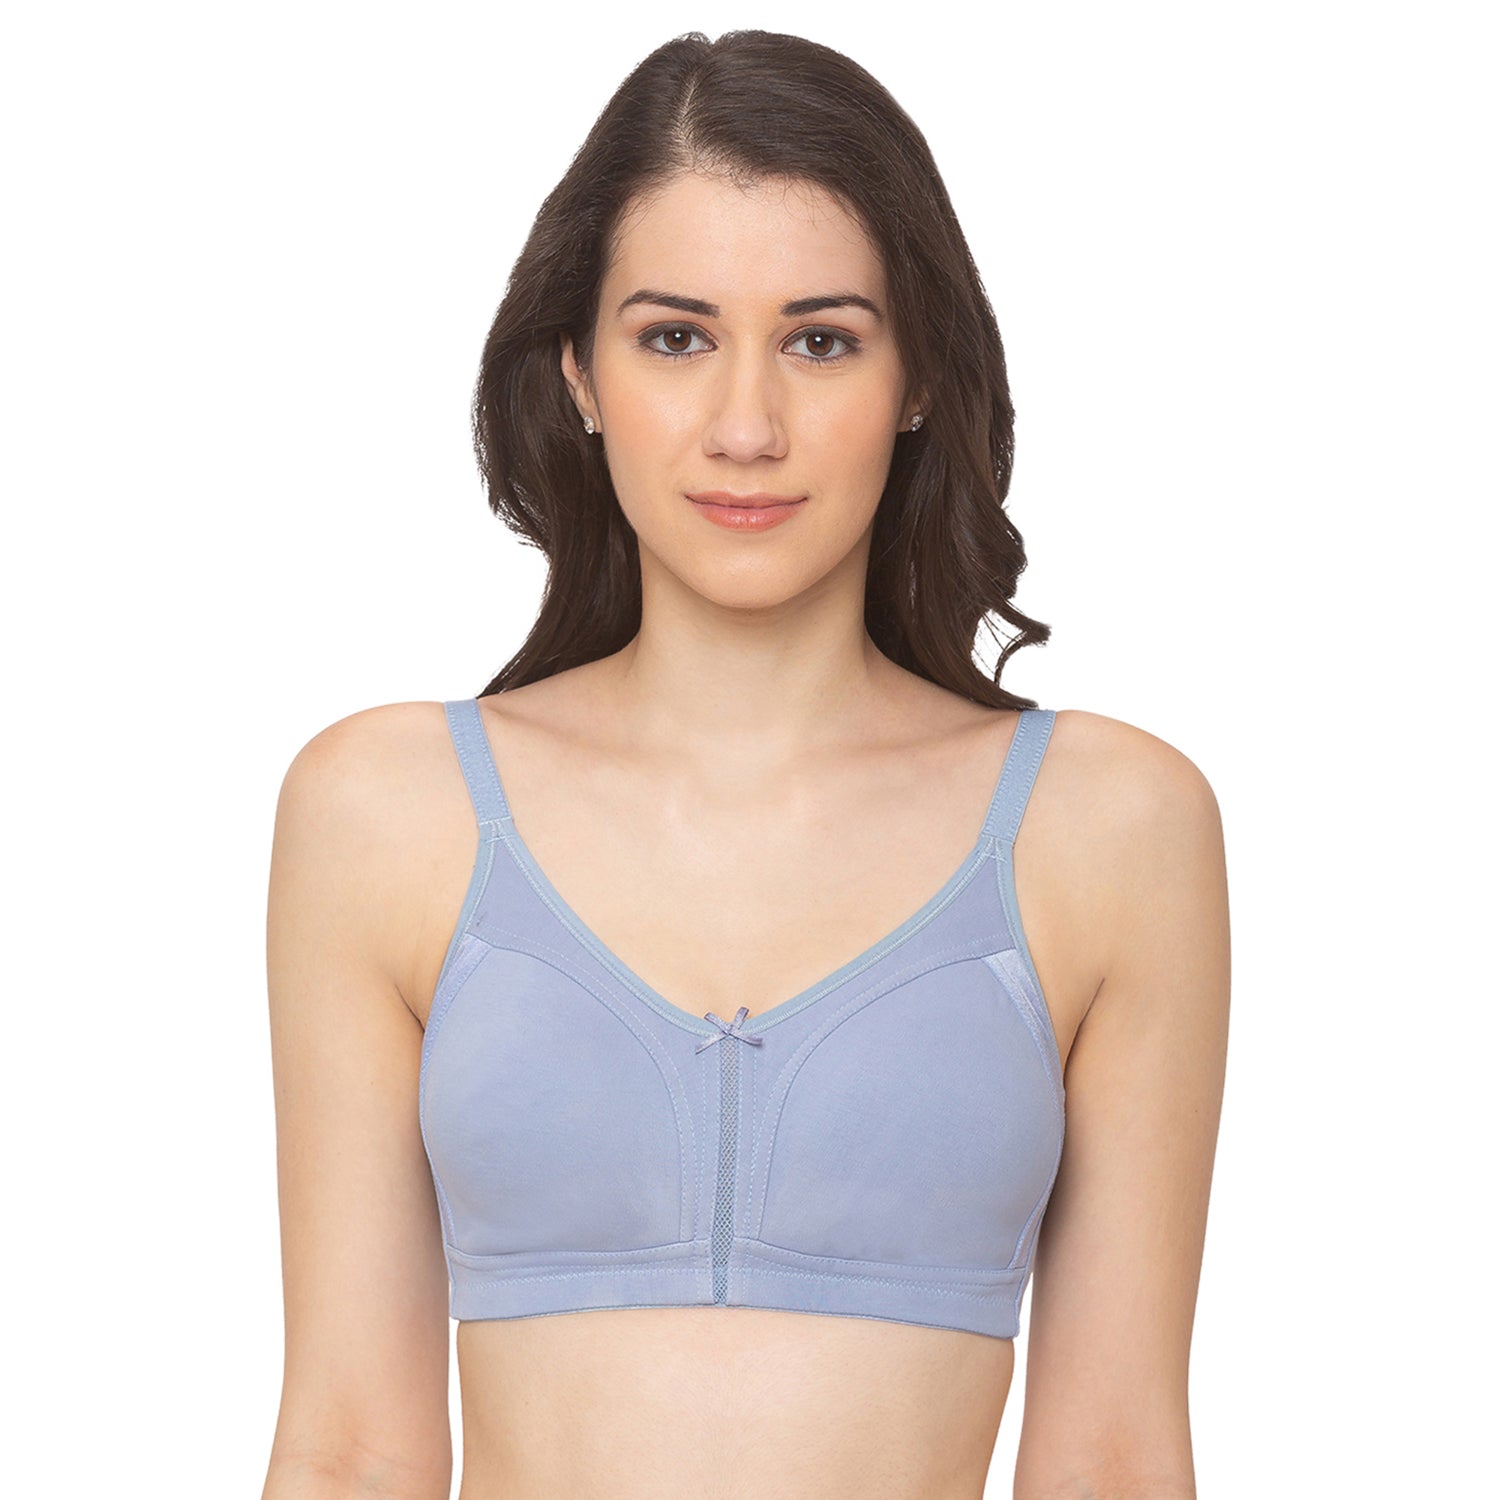 Women's Full Support Cotton Non-Padded Wirefree Bra - Powder Blue